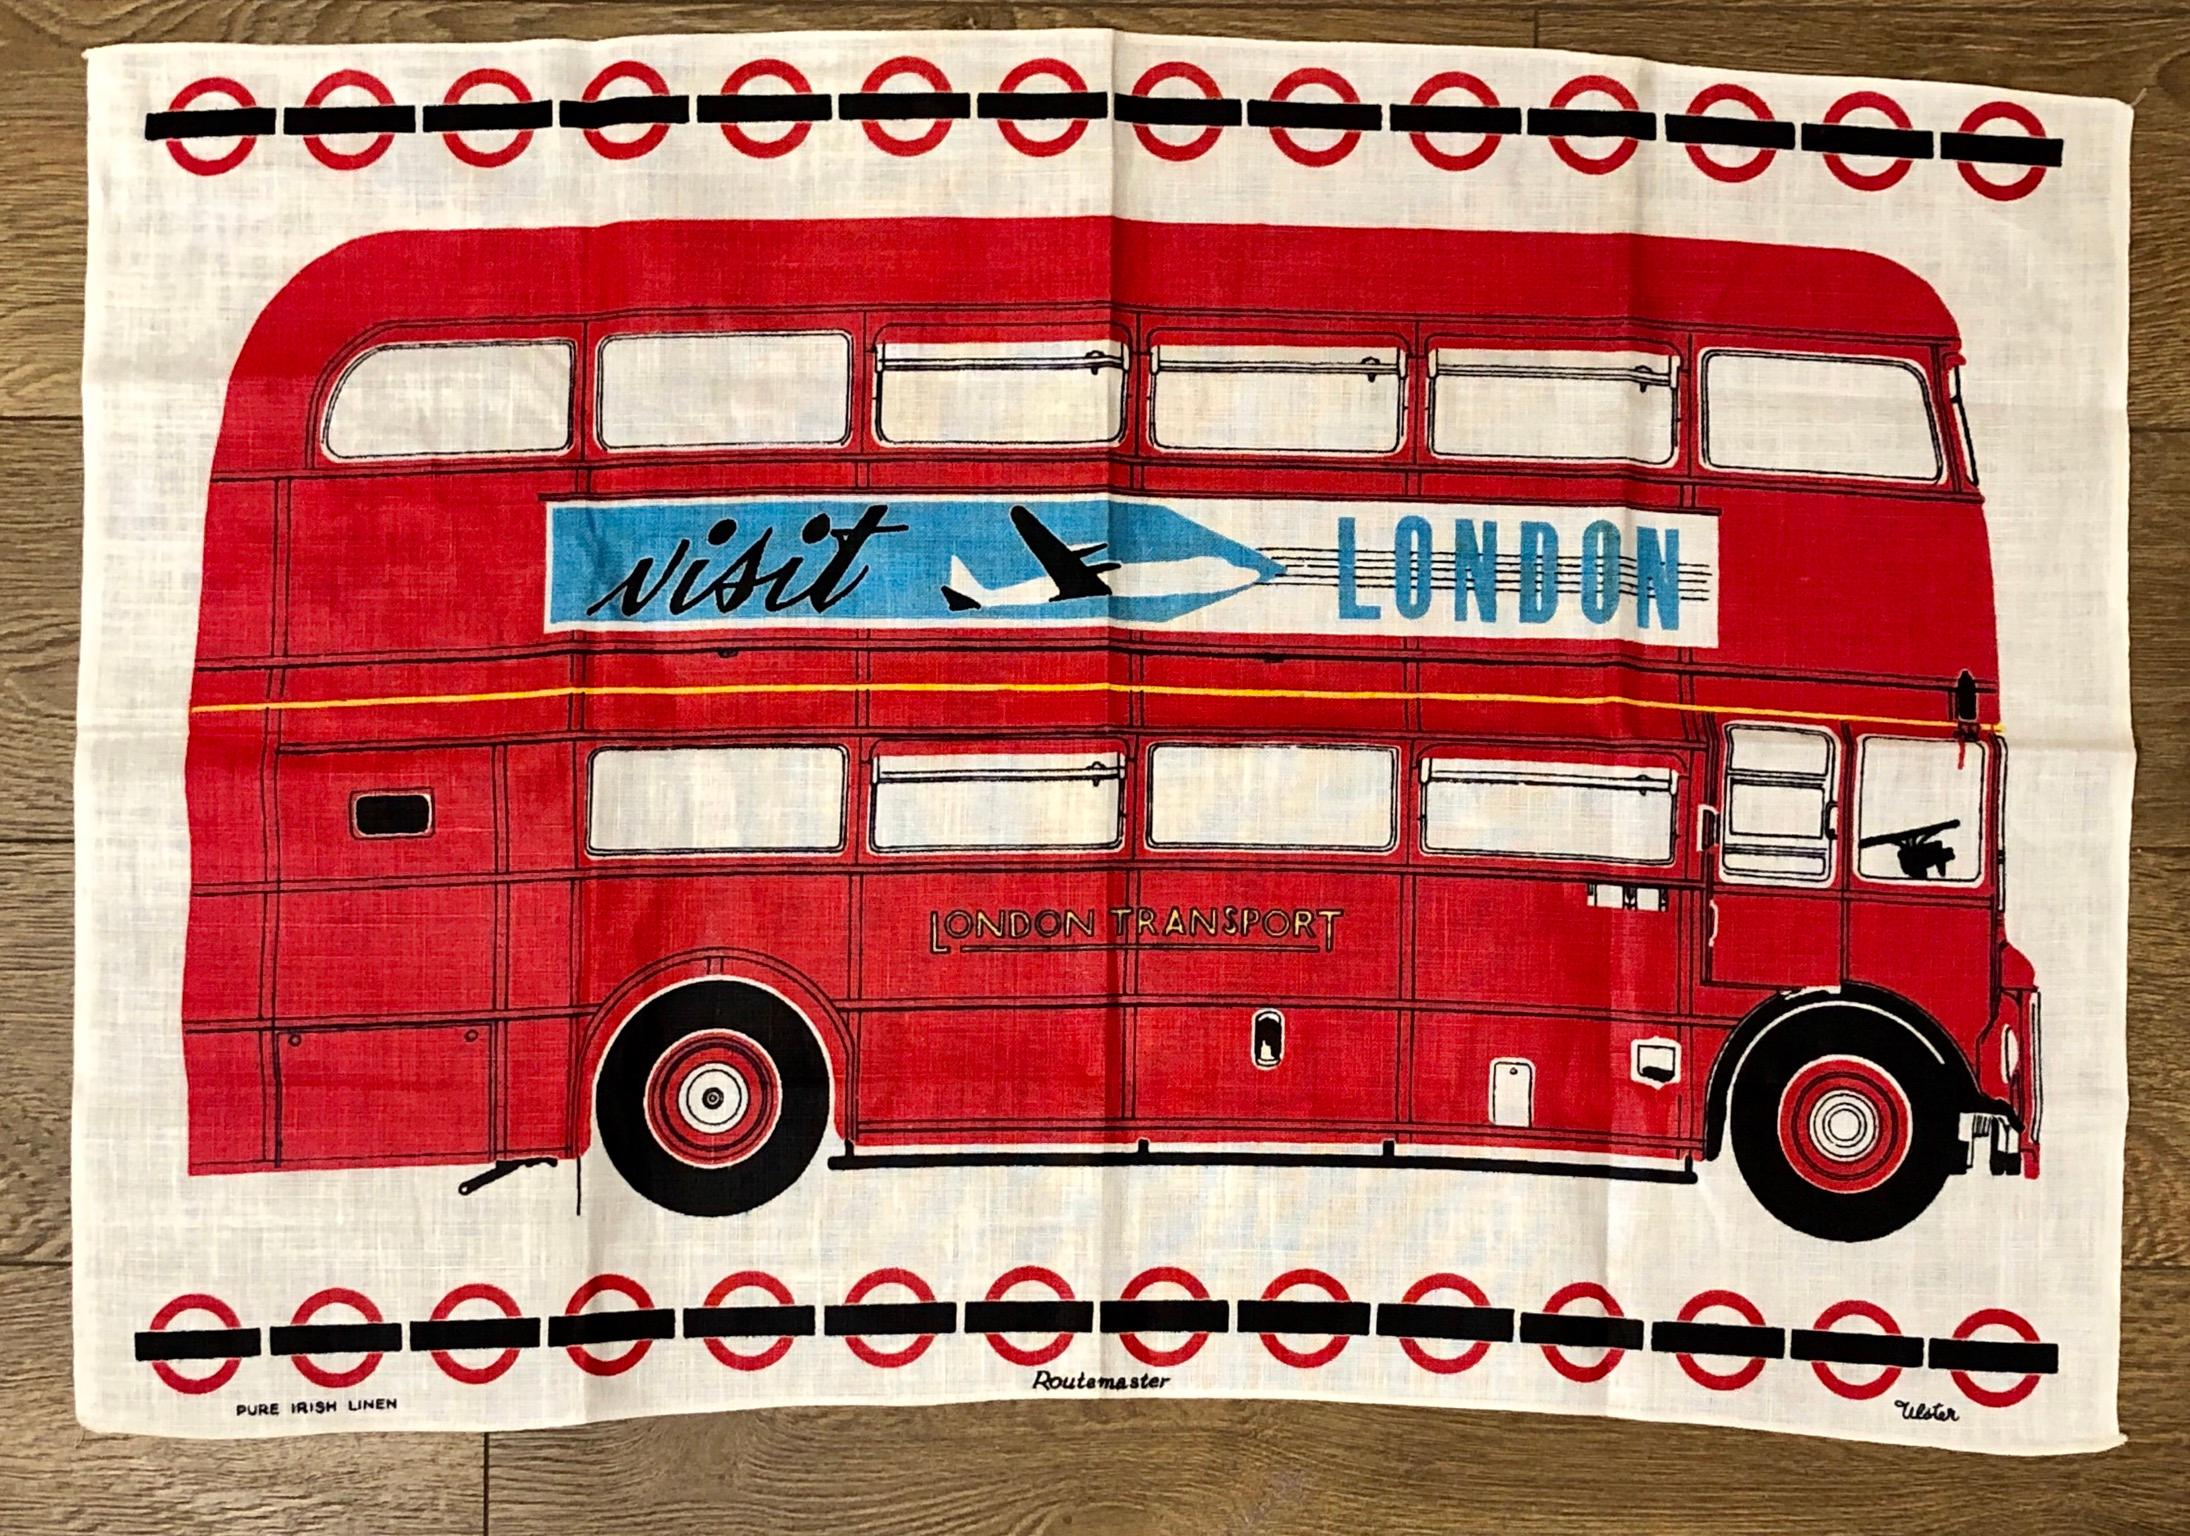 A very collectible vintage London transport Double-decker Bus, circa 1970s 100% Irish Linen, great condition never used, can be framed or hang on the wall.